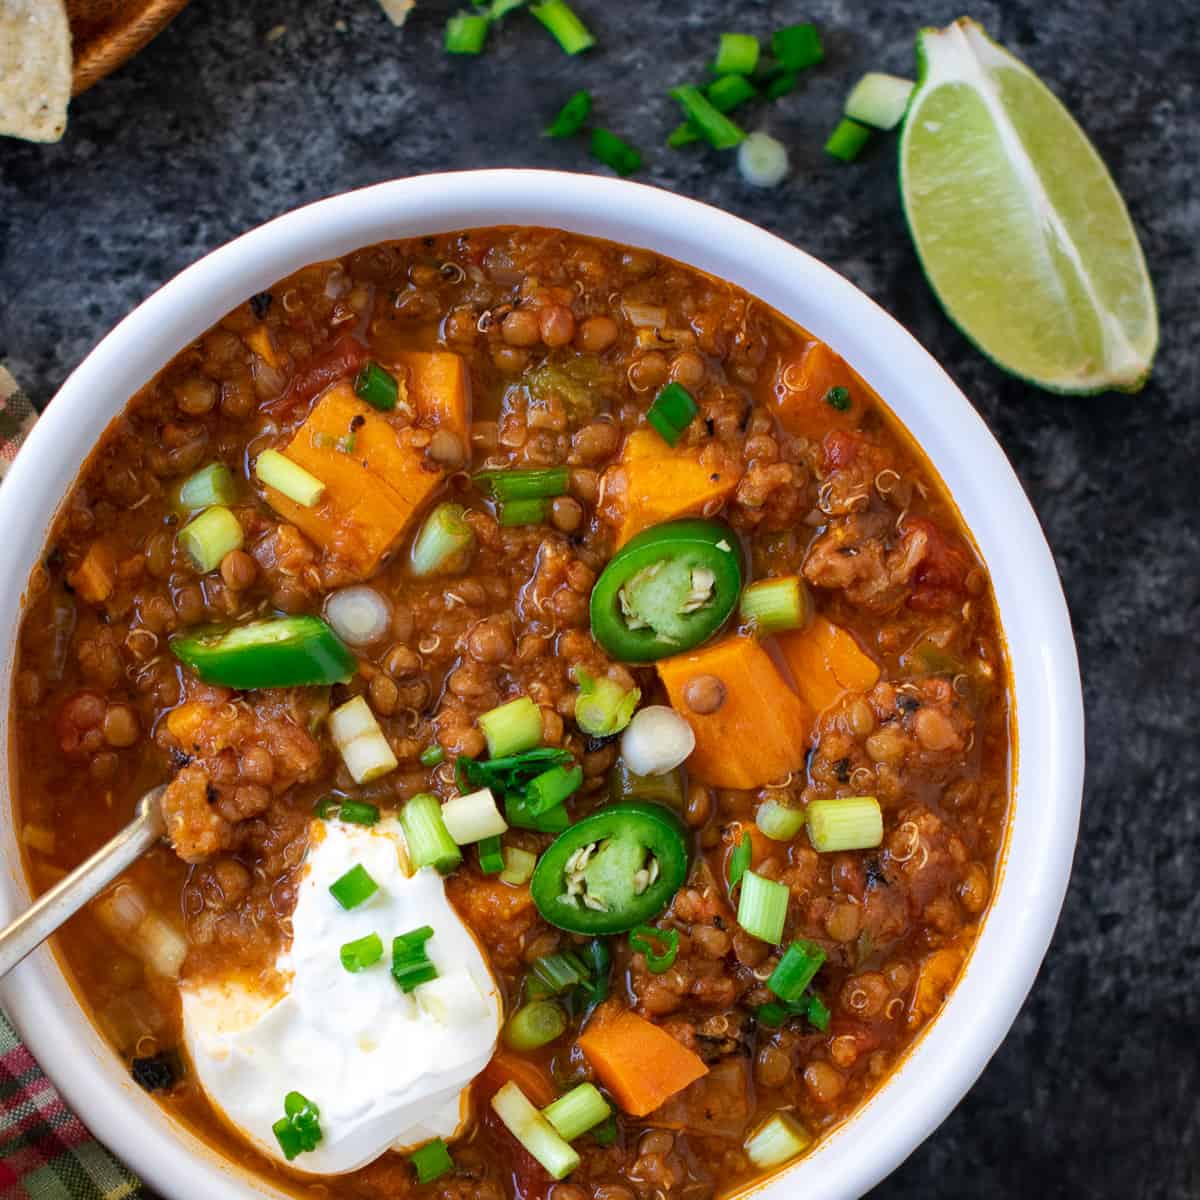 Sweet potato chili served with sour cream on top